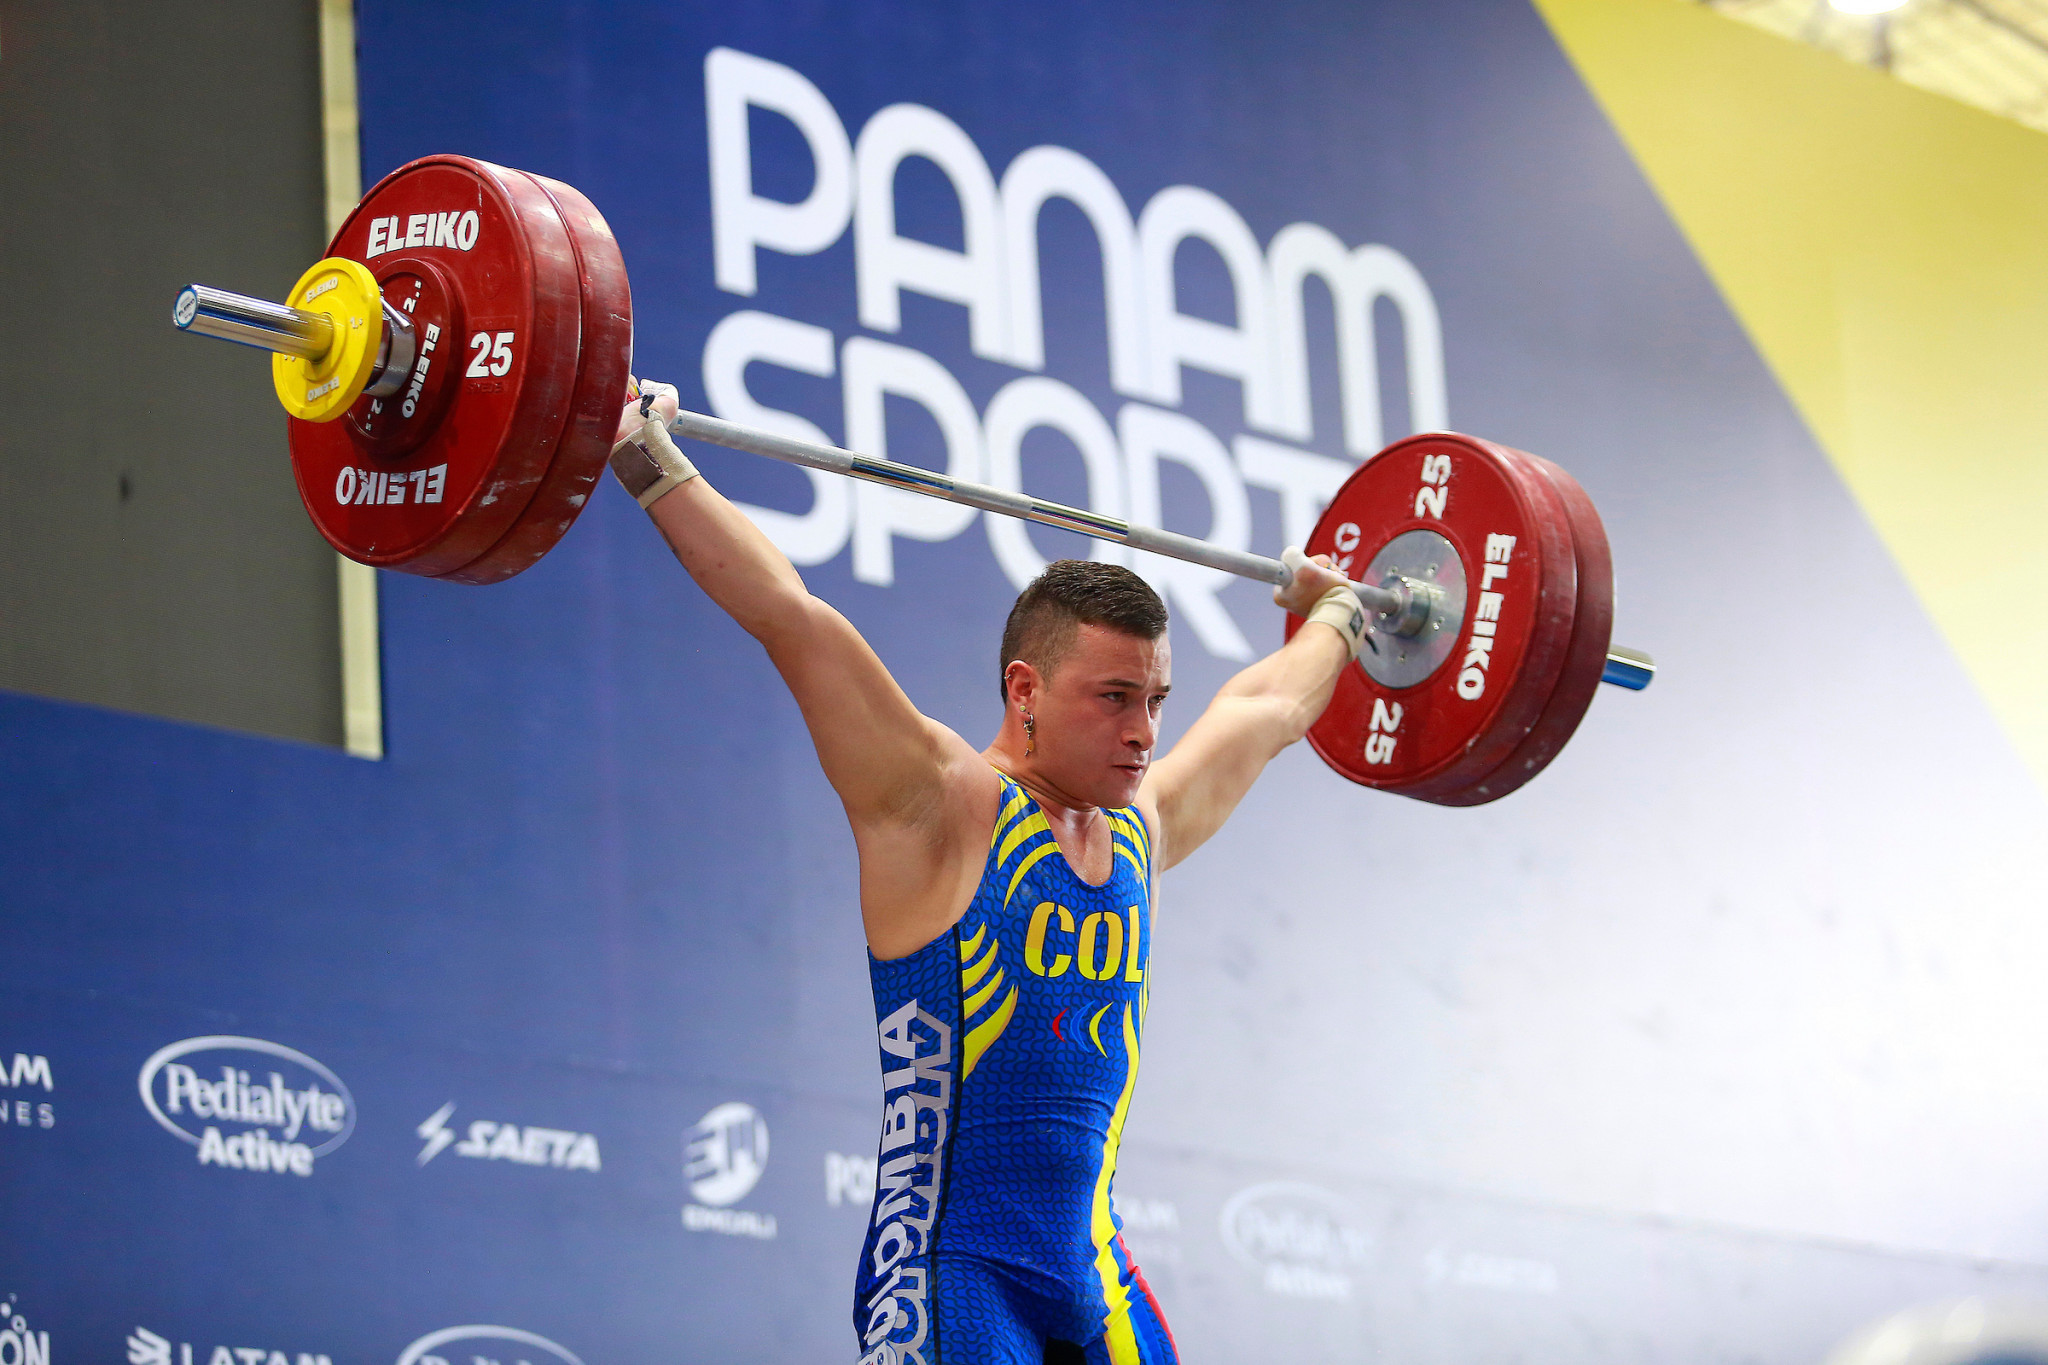 Juan Camilo Martinez capped off a special day for Colombia by winning the men's 73kg category ©Agencia.Xpress Media